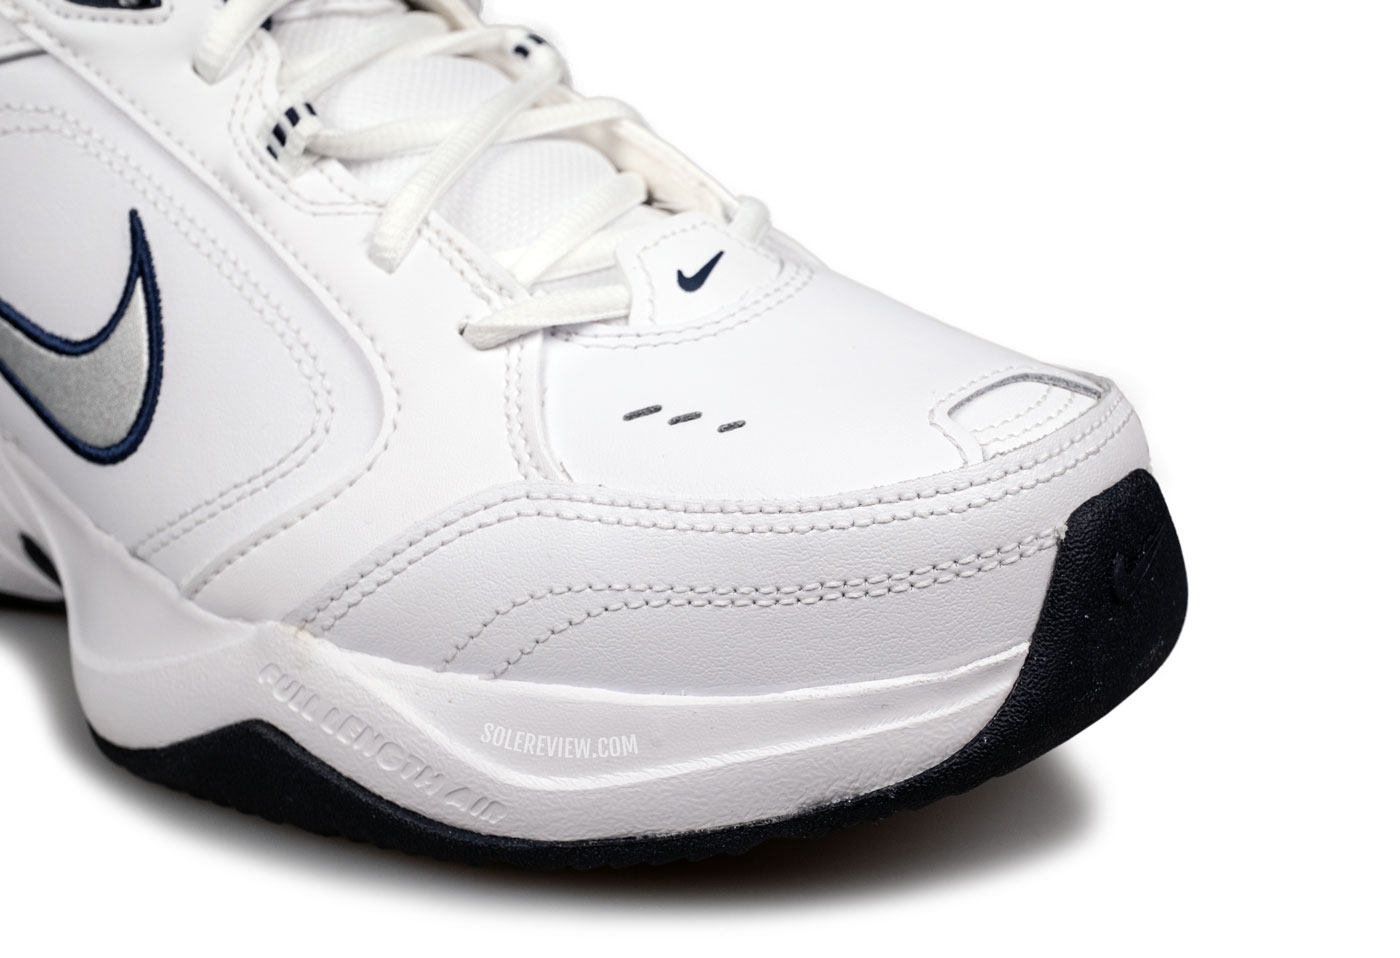 The toe box of the Nike Monarch IV.